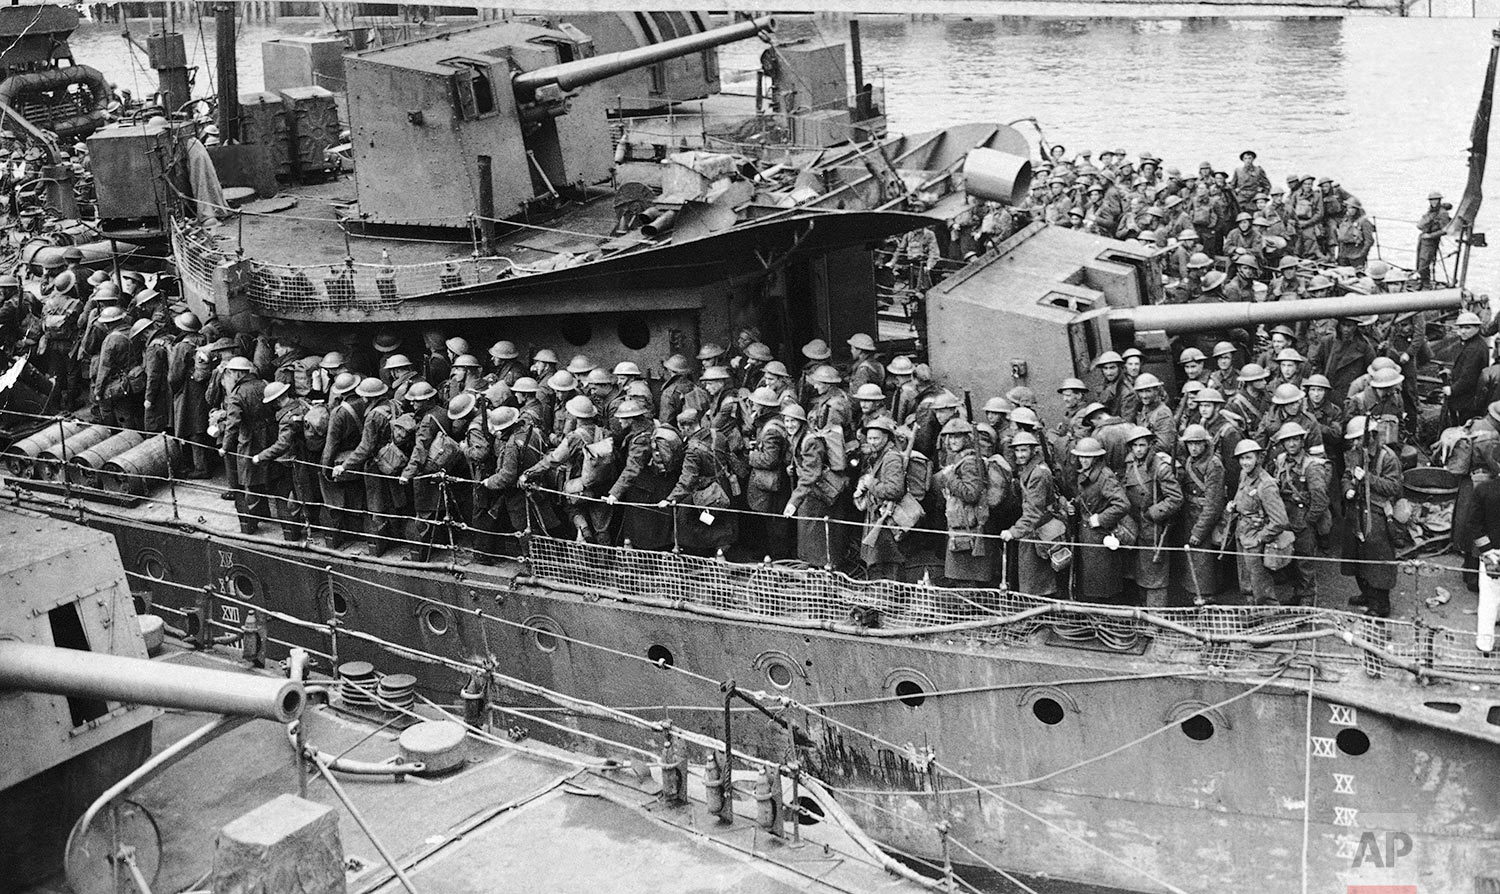  Troops of the British expeditionary force landing from a destroyer at a British port on June 1, 1940 after being evacuated, following heroic fighting, from Flanders. (AP Photo) 